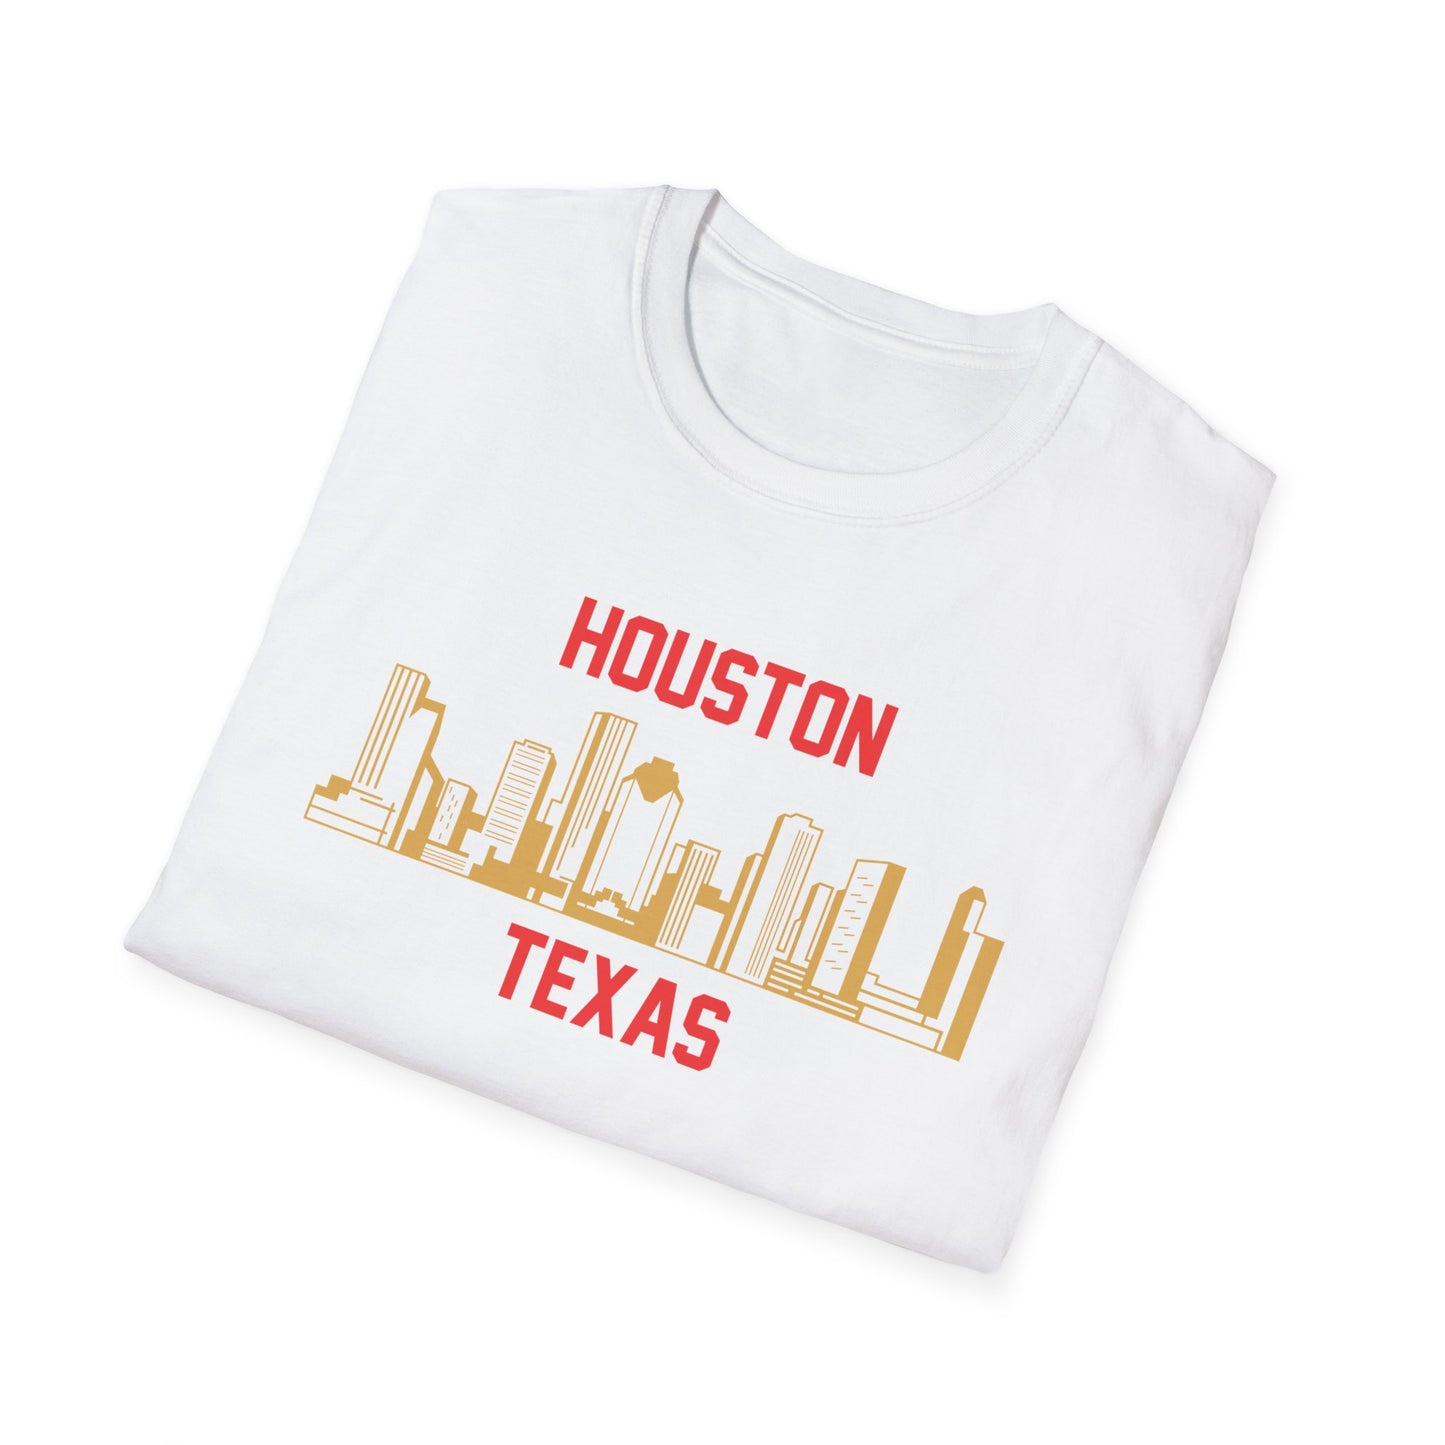 Houston Vibes: Stylish and Comfortable T-shirt to Flaunt Your Texan Pride!